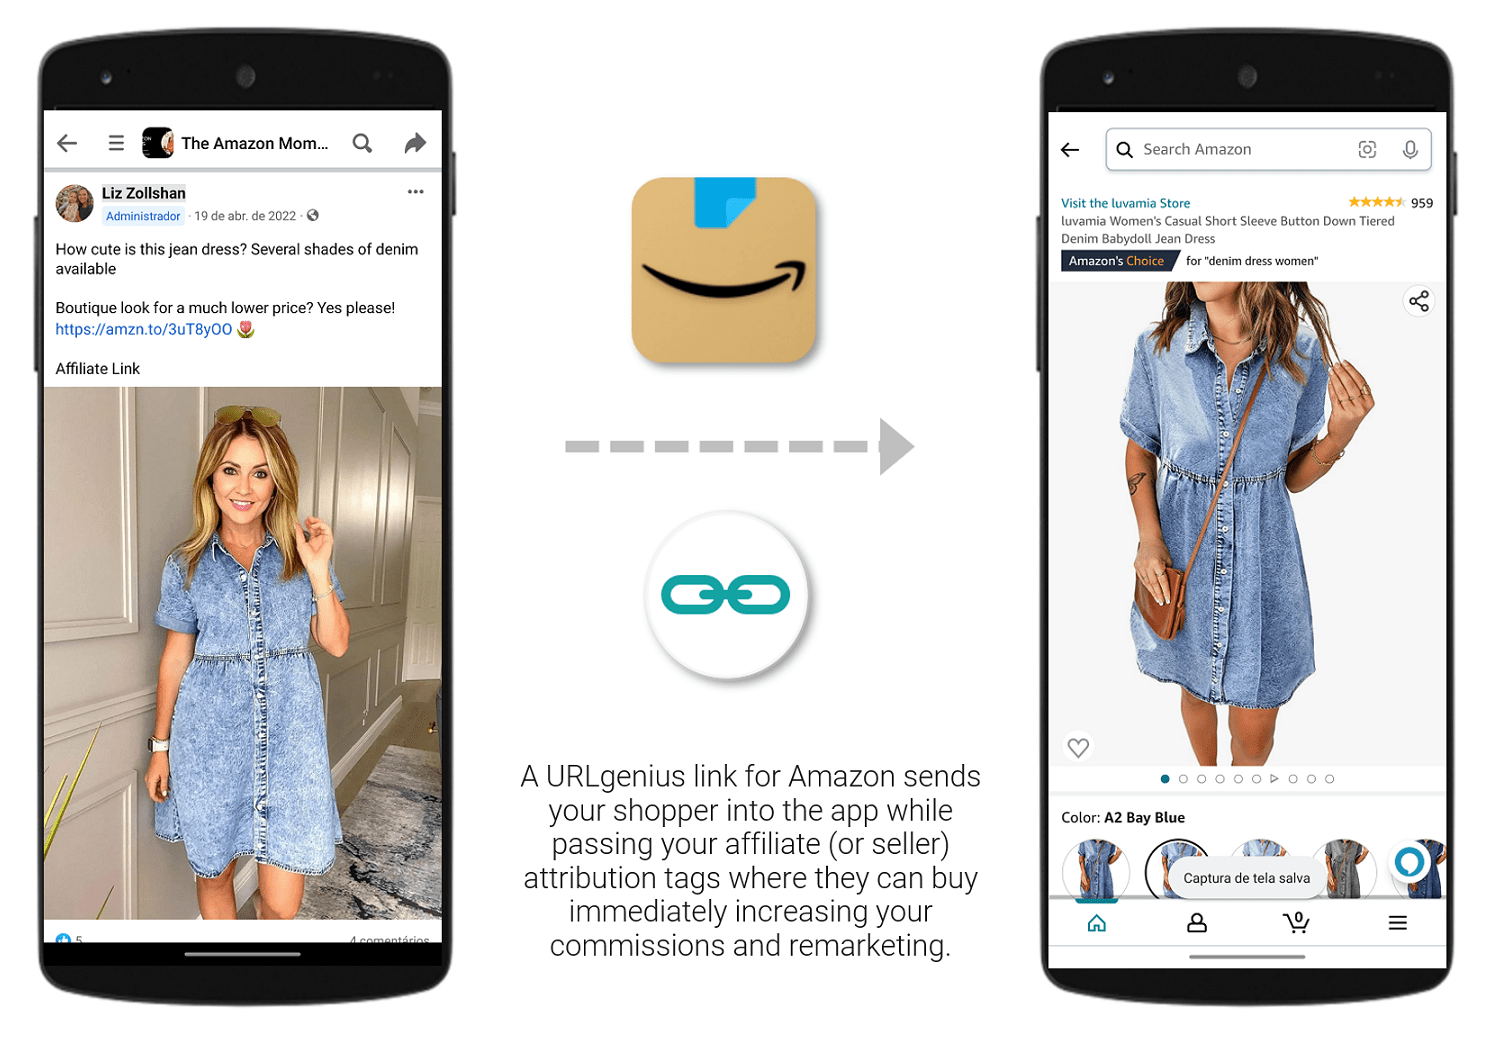 A URLgenius link for Amazon sends your shopper into the app while passing your affiliate (or seller) attribution tags where they can buy immediately increasing your commissions and remarketing 